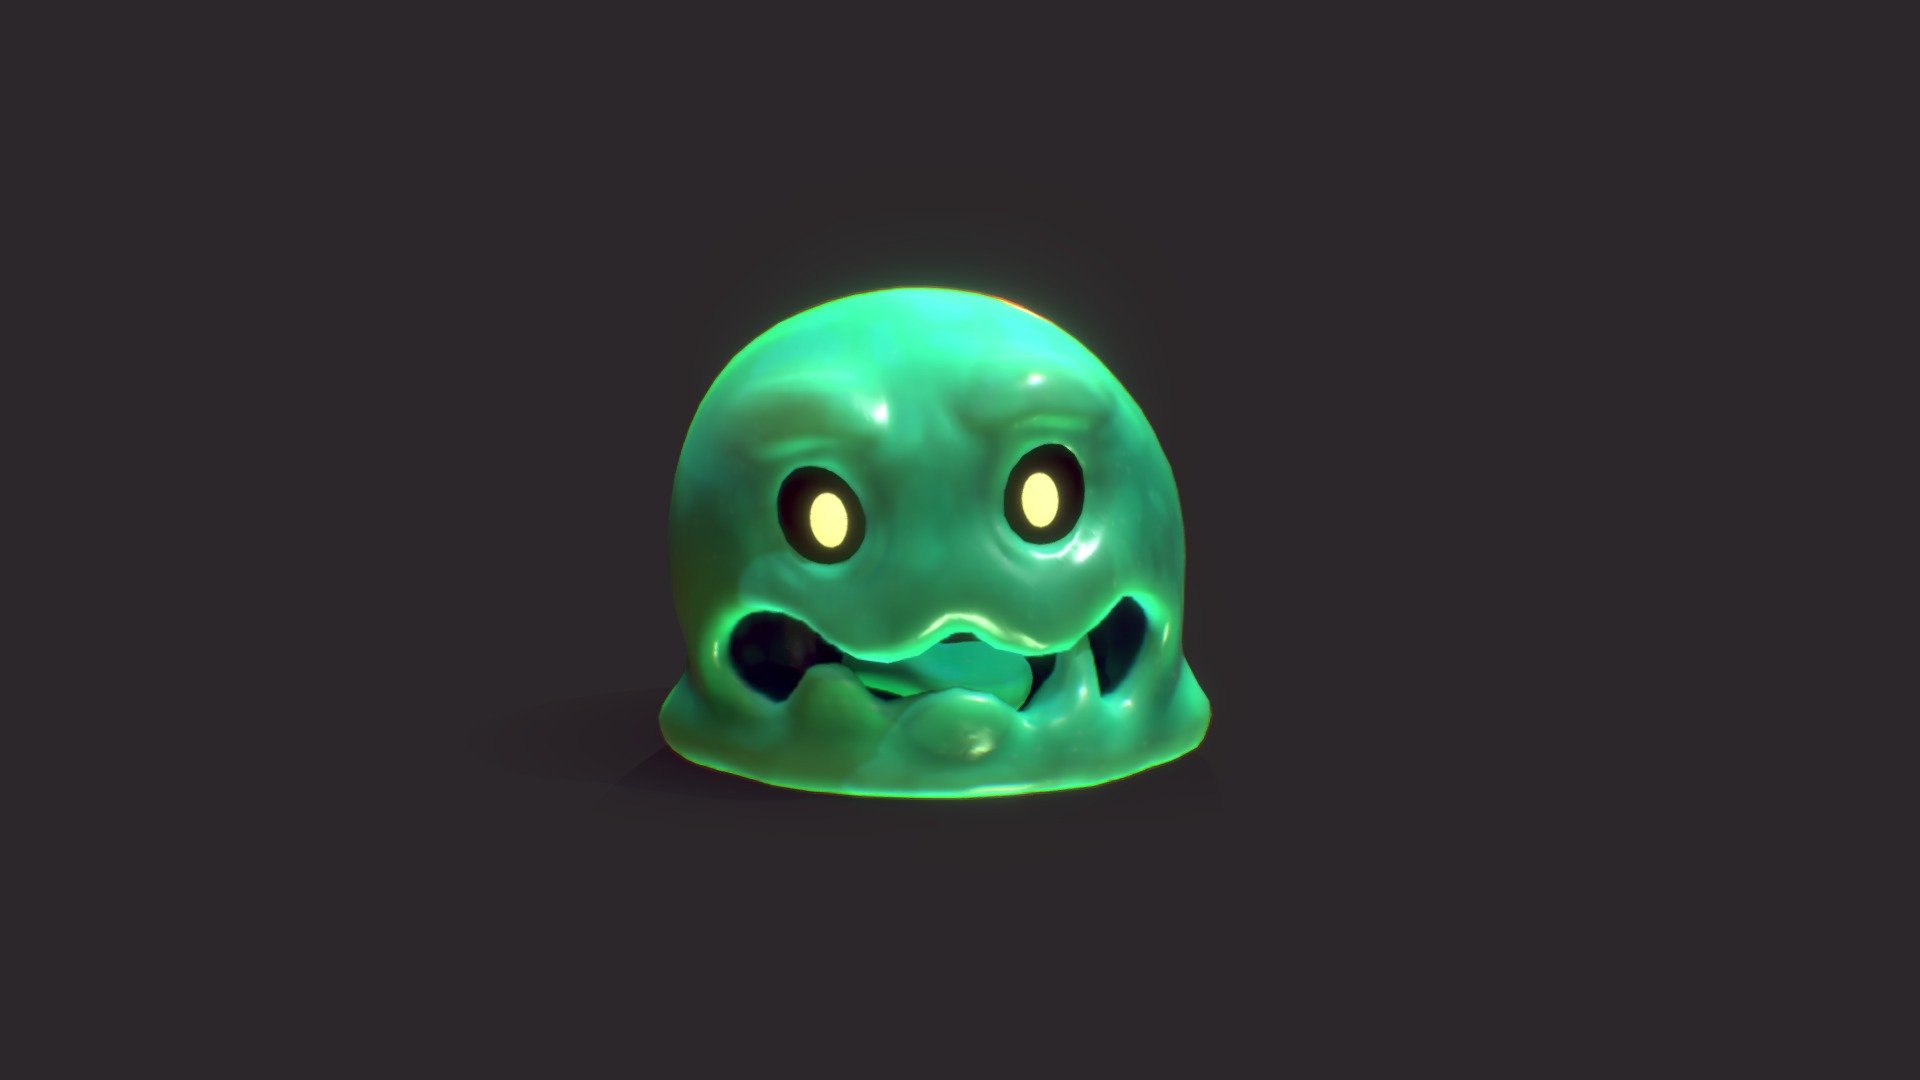 Rigged and animated slime monster perfect for any classic adventure game or production.

25 Animations:




Idle A

Idle B

Idle C

Hit A

Hit A (RootMotion)

Hit B  (RootMotion)

Death

Alert

Attack A

Attack B

Bounce Forward

Bounce Forward (RootMotion)

Jump Full

Jump Start

Jump Idle

Jump End

Roar

Runaway

Runaway (RootMotion)

Skill A

Spawn

Stun

Walk A

Walk A (RootMotion)

PBR Textures included: Base Color, Normal, Roughness, Emission.

2048x2048 PNG texture - Slimey / Animated - Buy Royalty Free 3D model by otzee 3d model